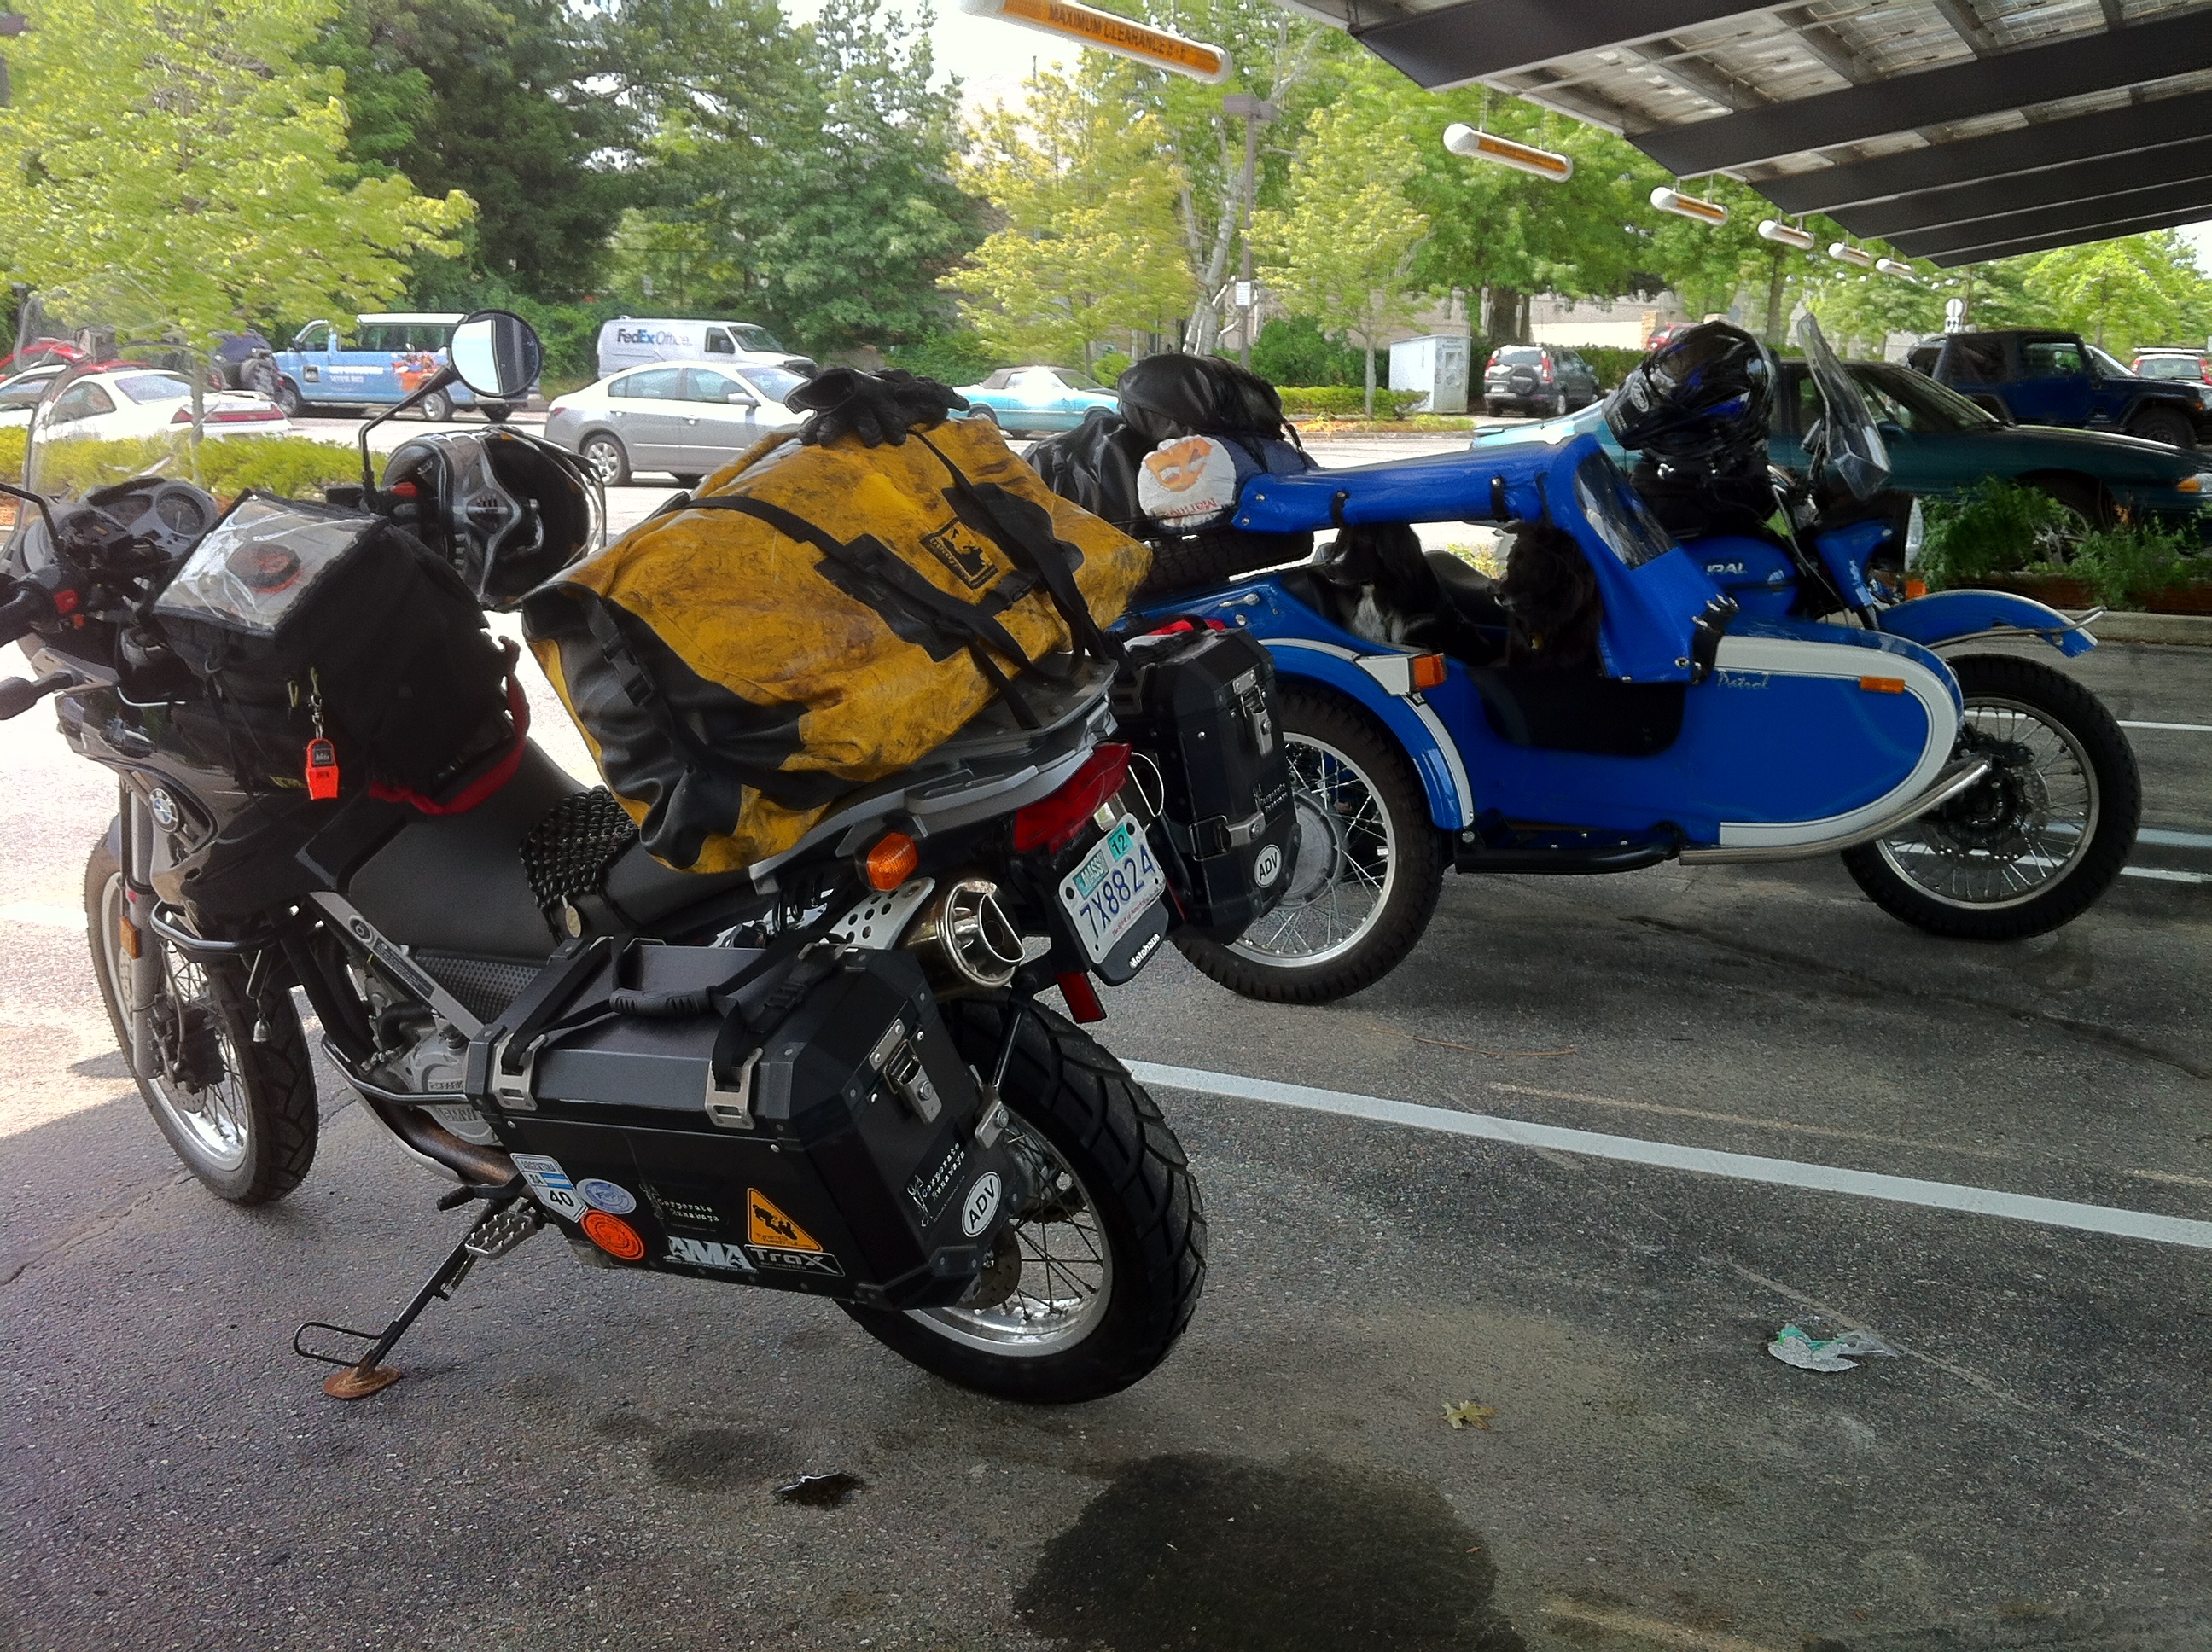 Bikes packed at the start of the Colorado trip